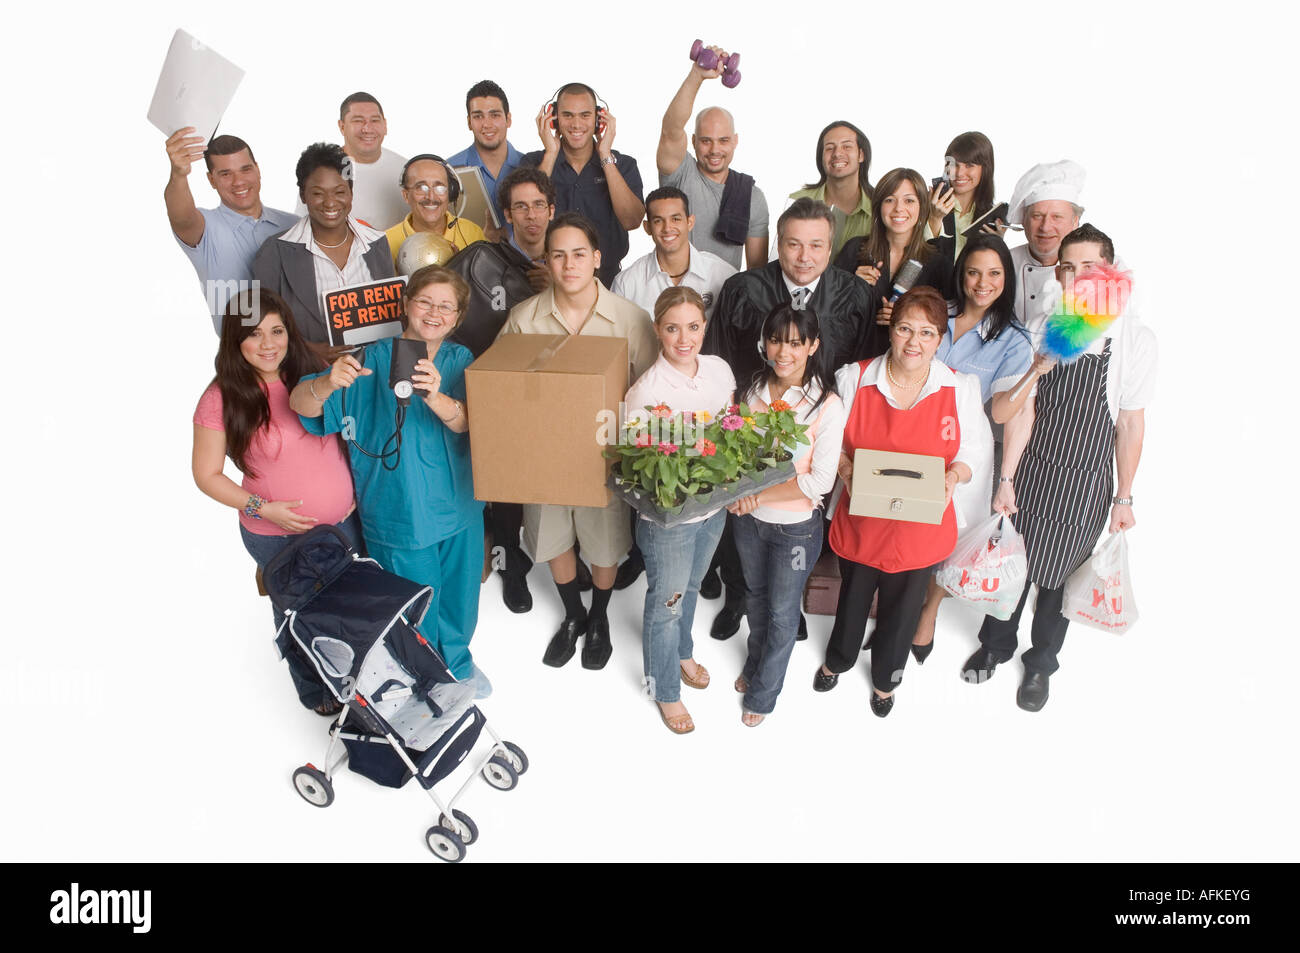 Group portrait of people with different occupations Stock Photo